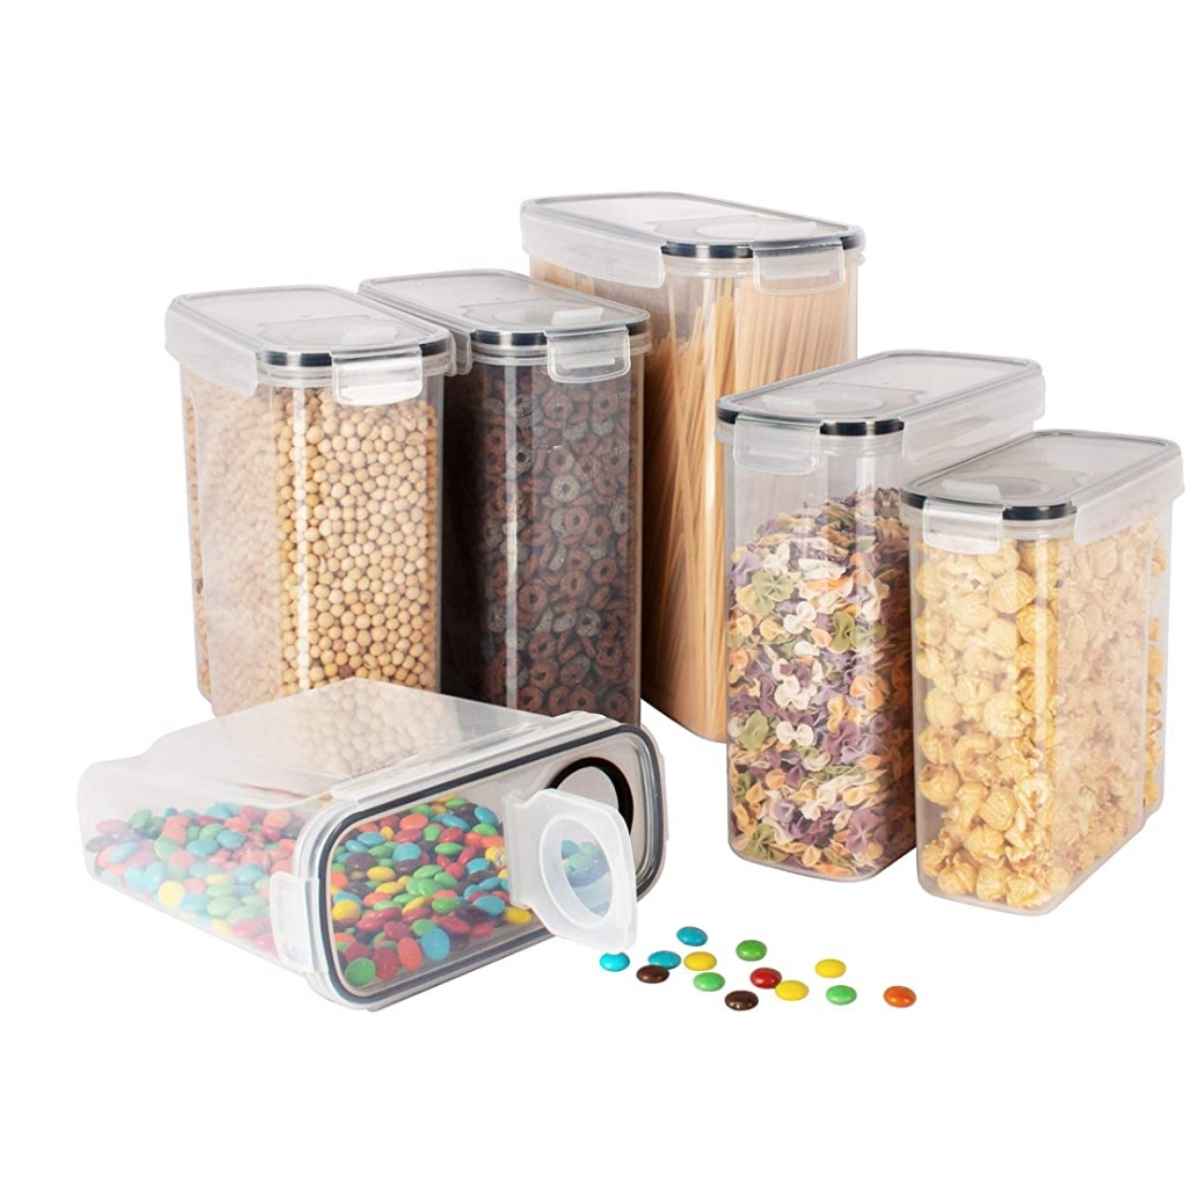 Kitsure cereal containers